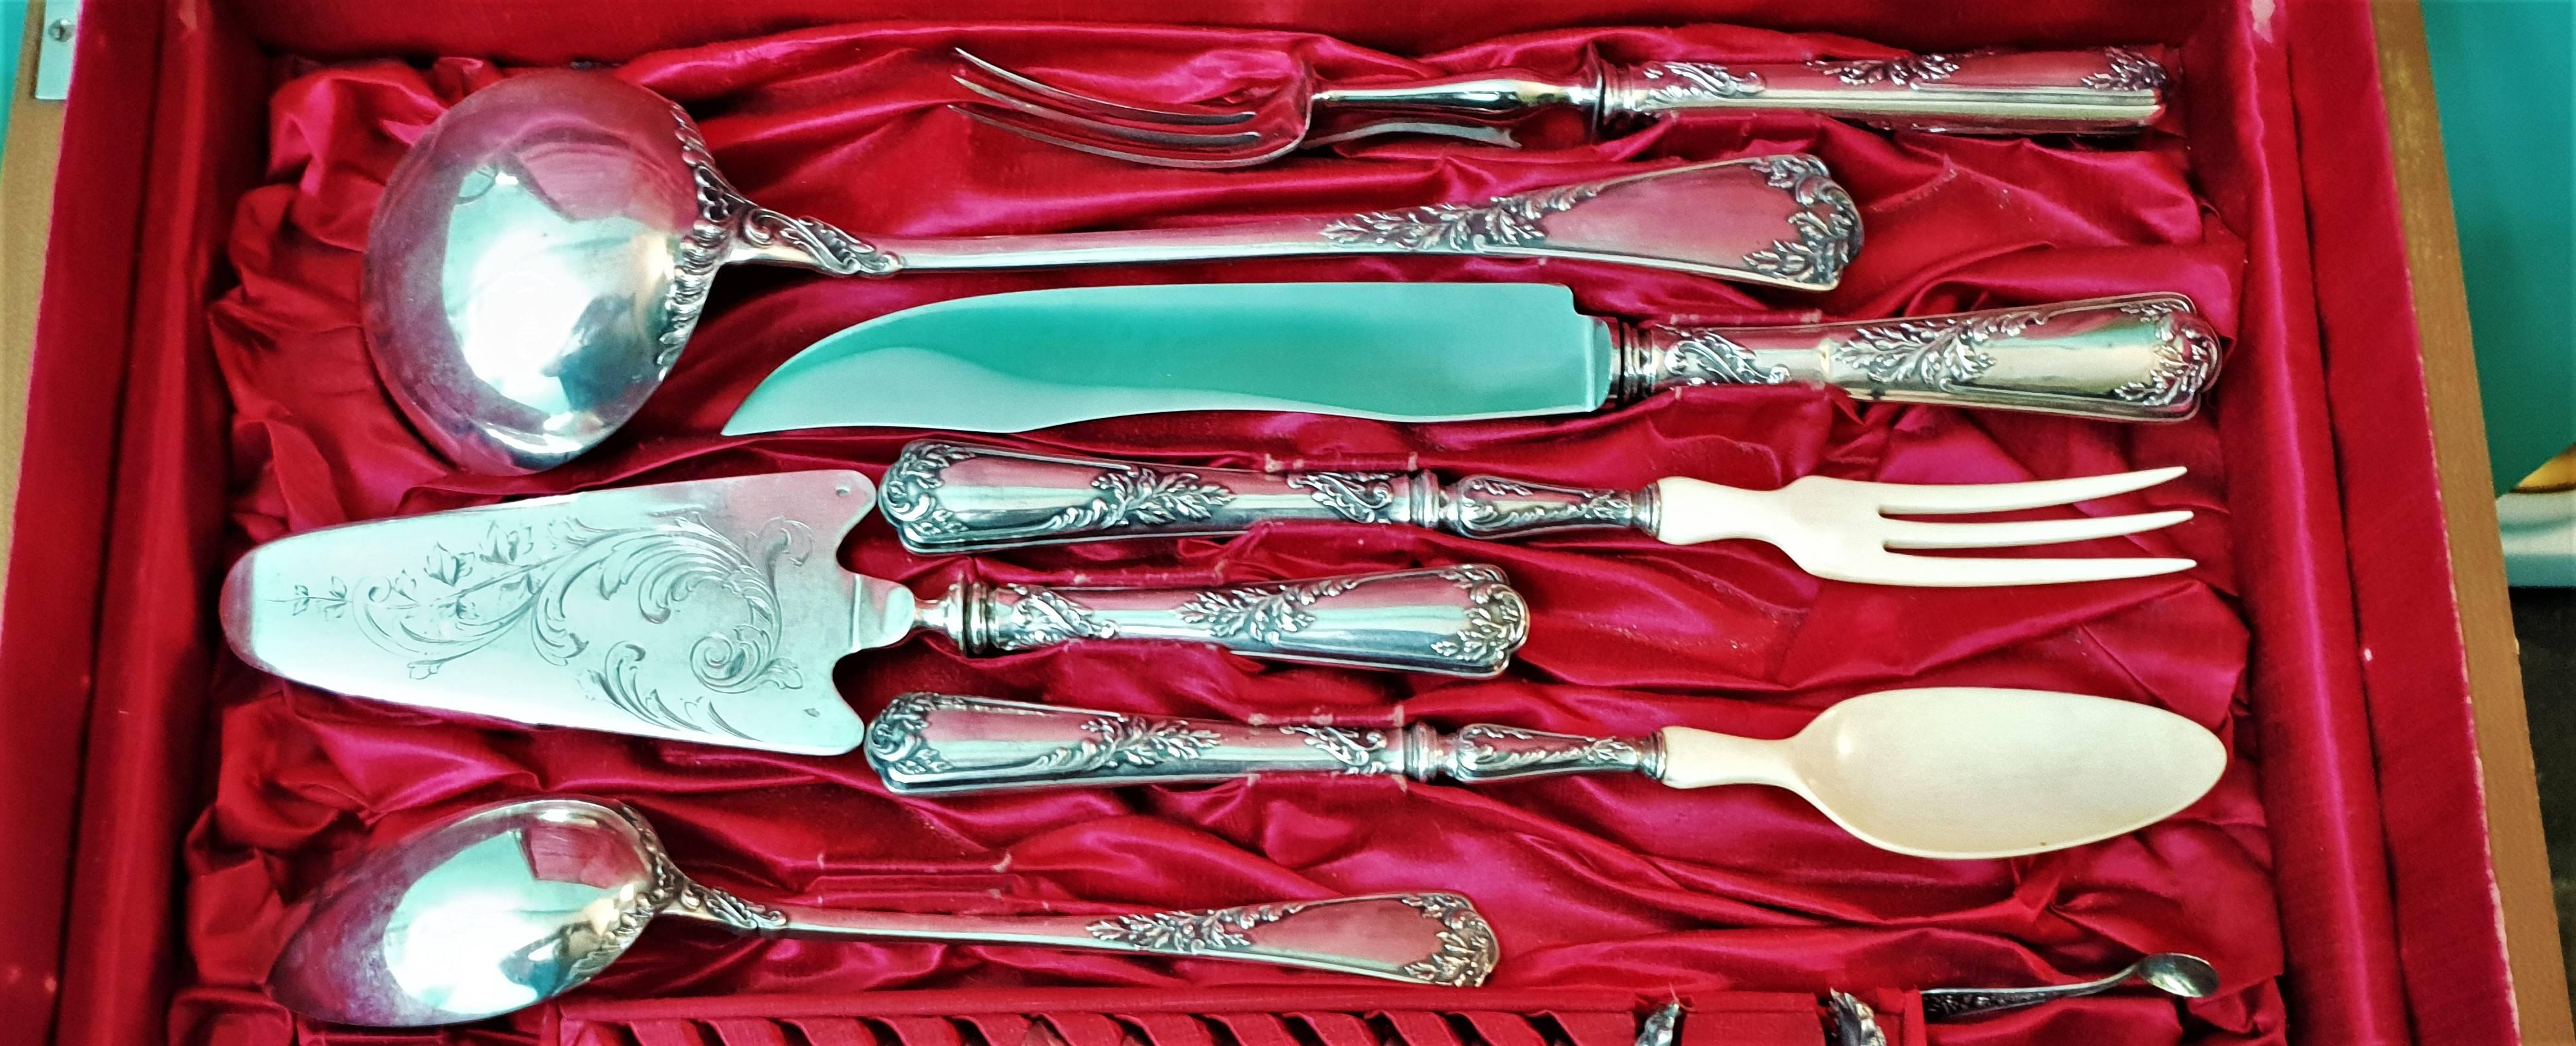 Emile Puiforcat 19th Century Engraved Silver Rococo French Flatware Set, 1870s For Sale 15